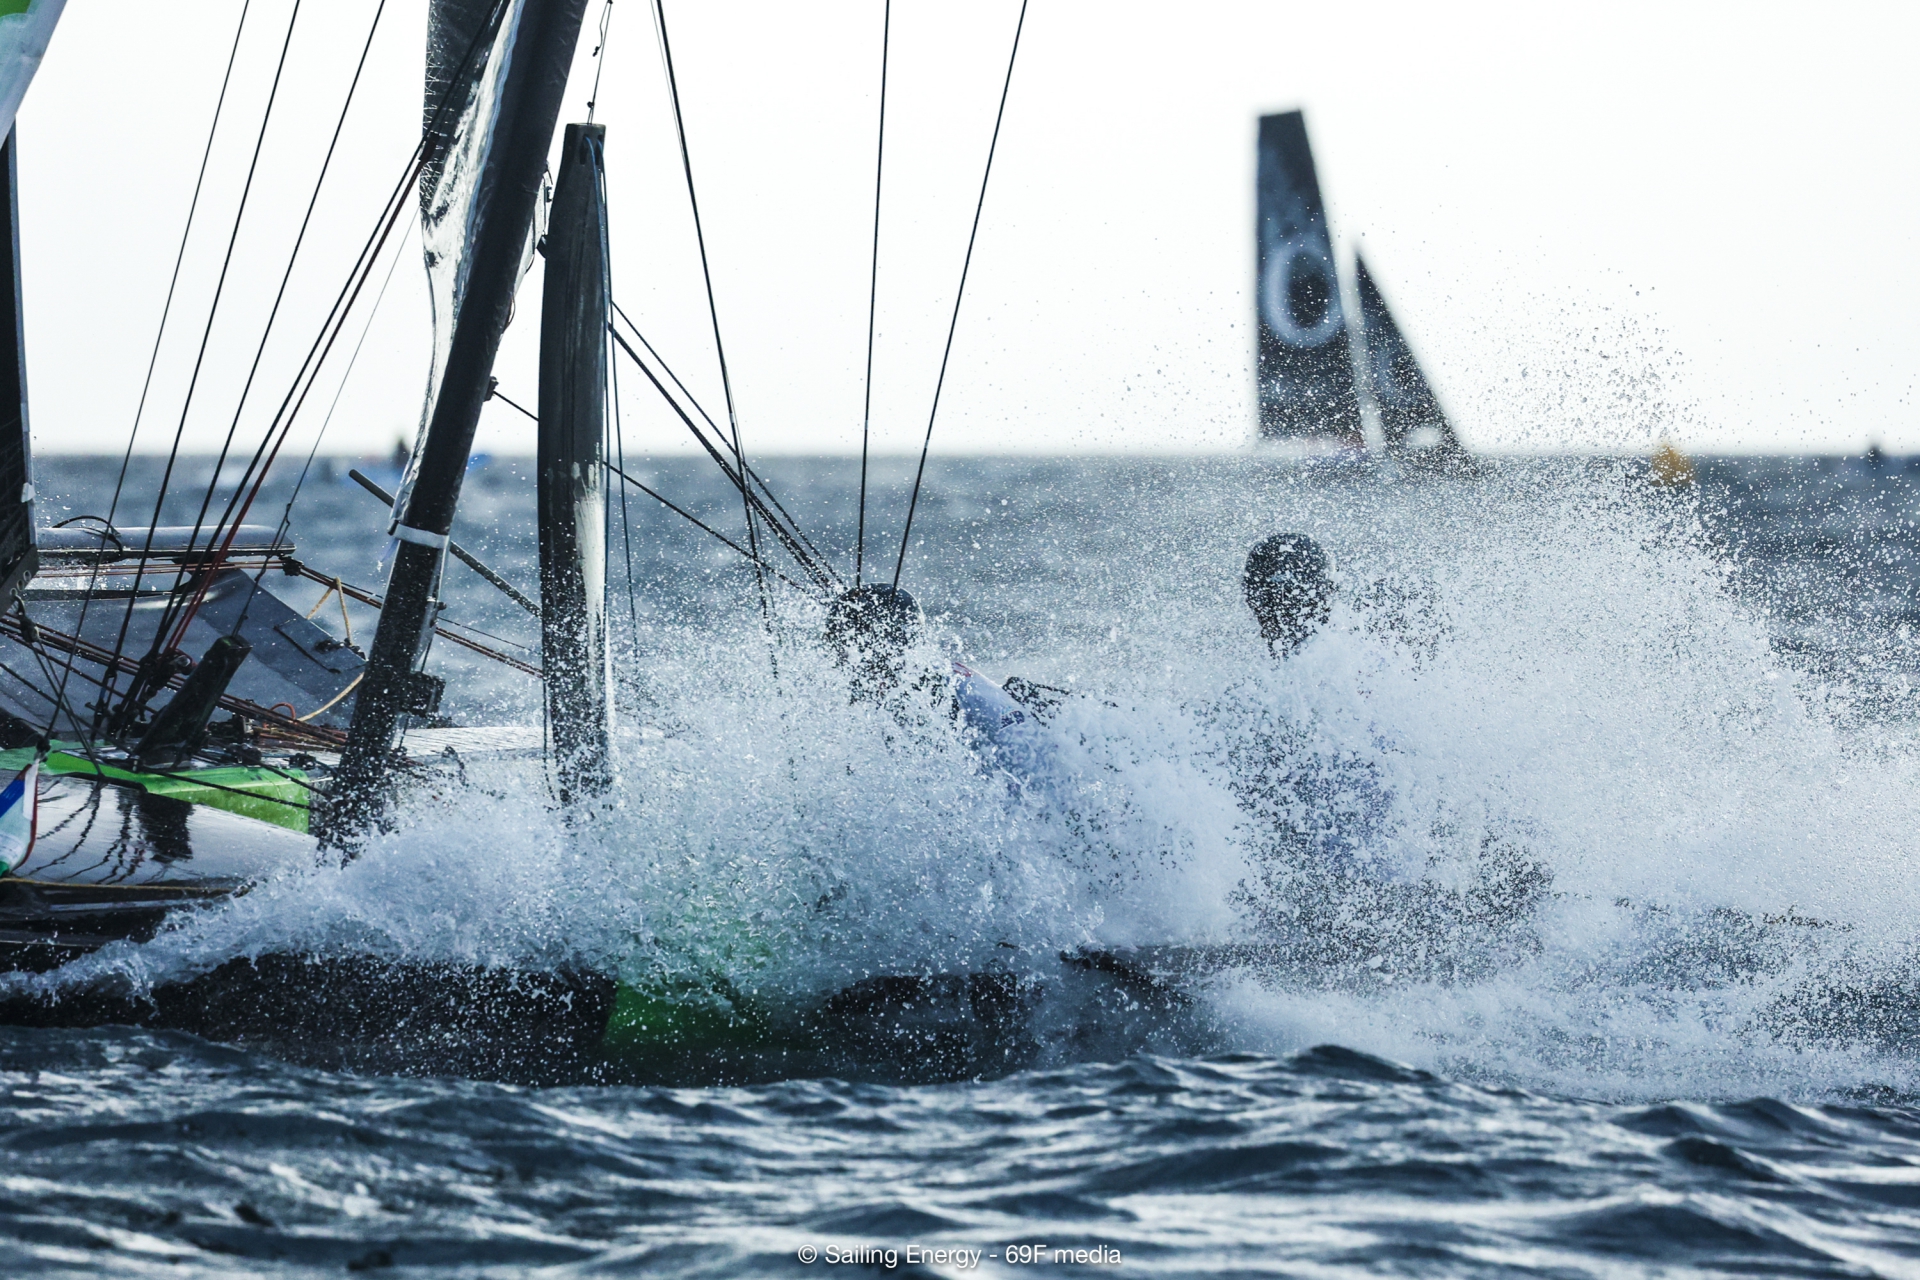 First day of racing in Grand Final of Youth Foiling Gold Cup - News - Yacht Club Costa Smeralda